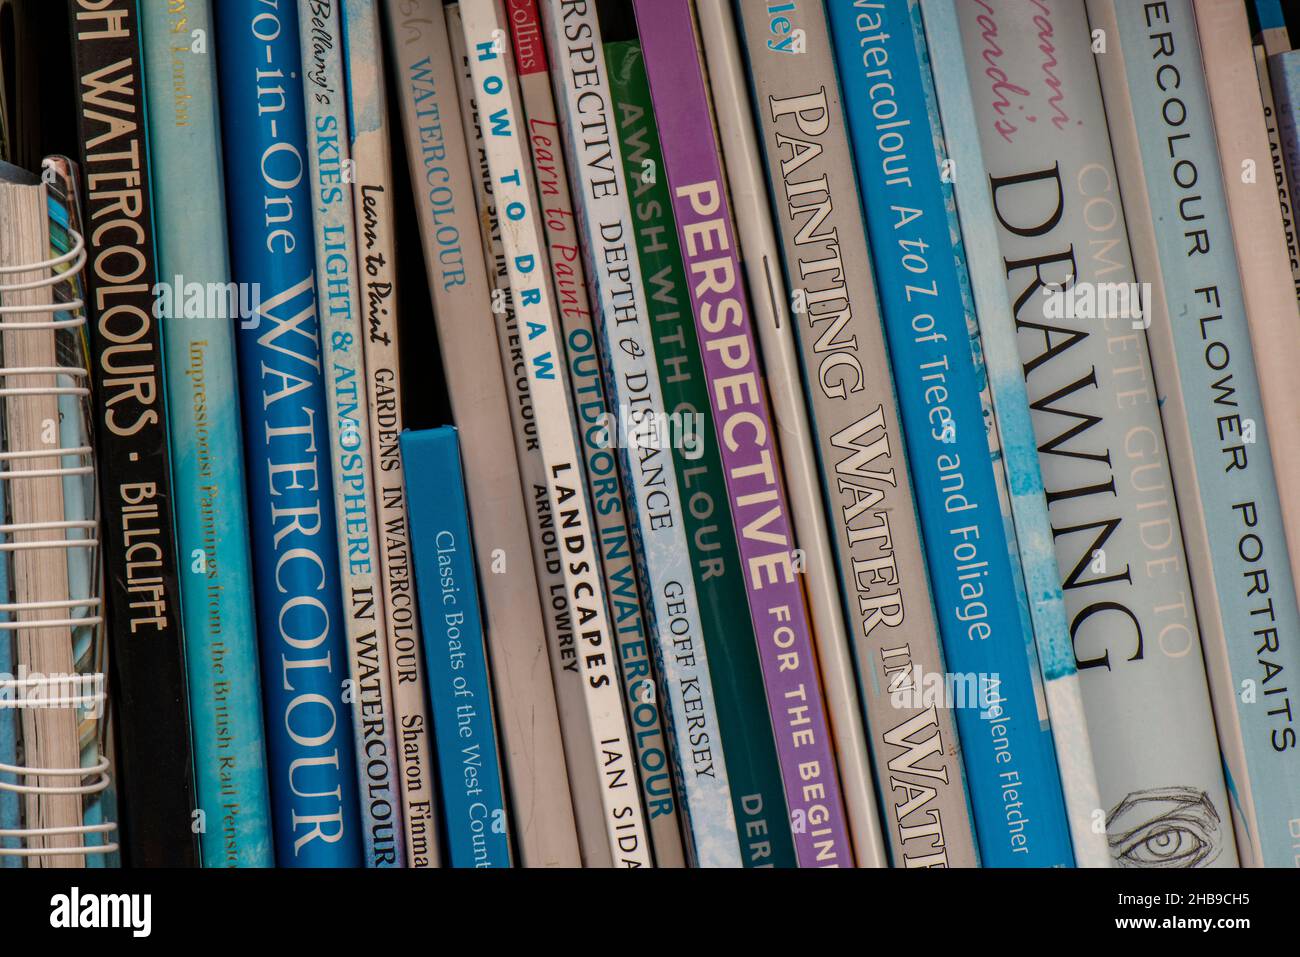 books on art and drawing on a bookshelf, artists instruction and reference books with various titles stacked together on a bookshelf in a study. Stock Photo